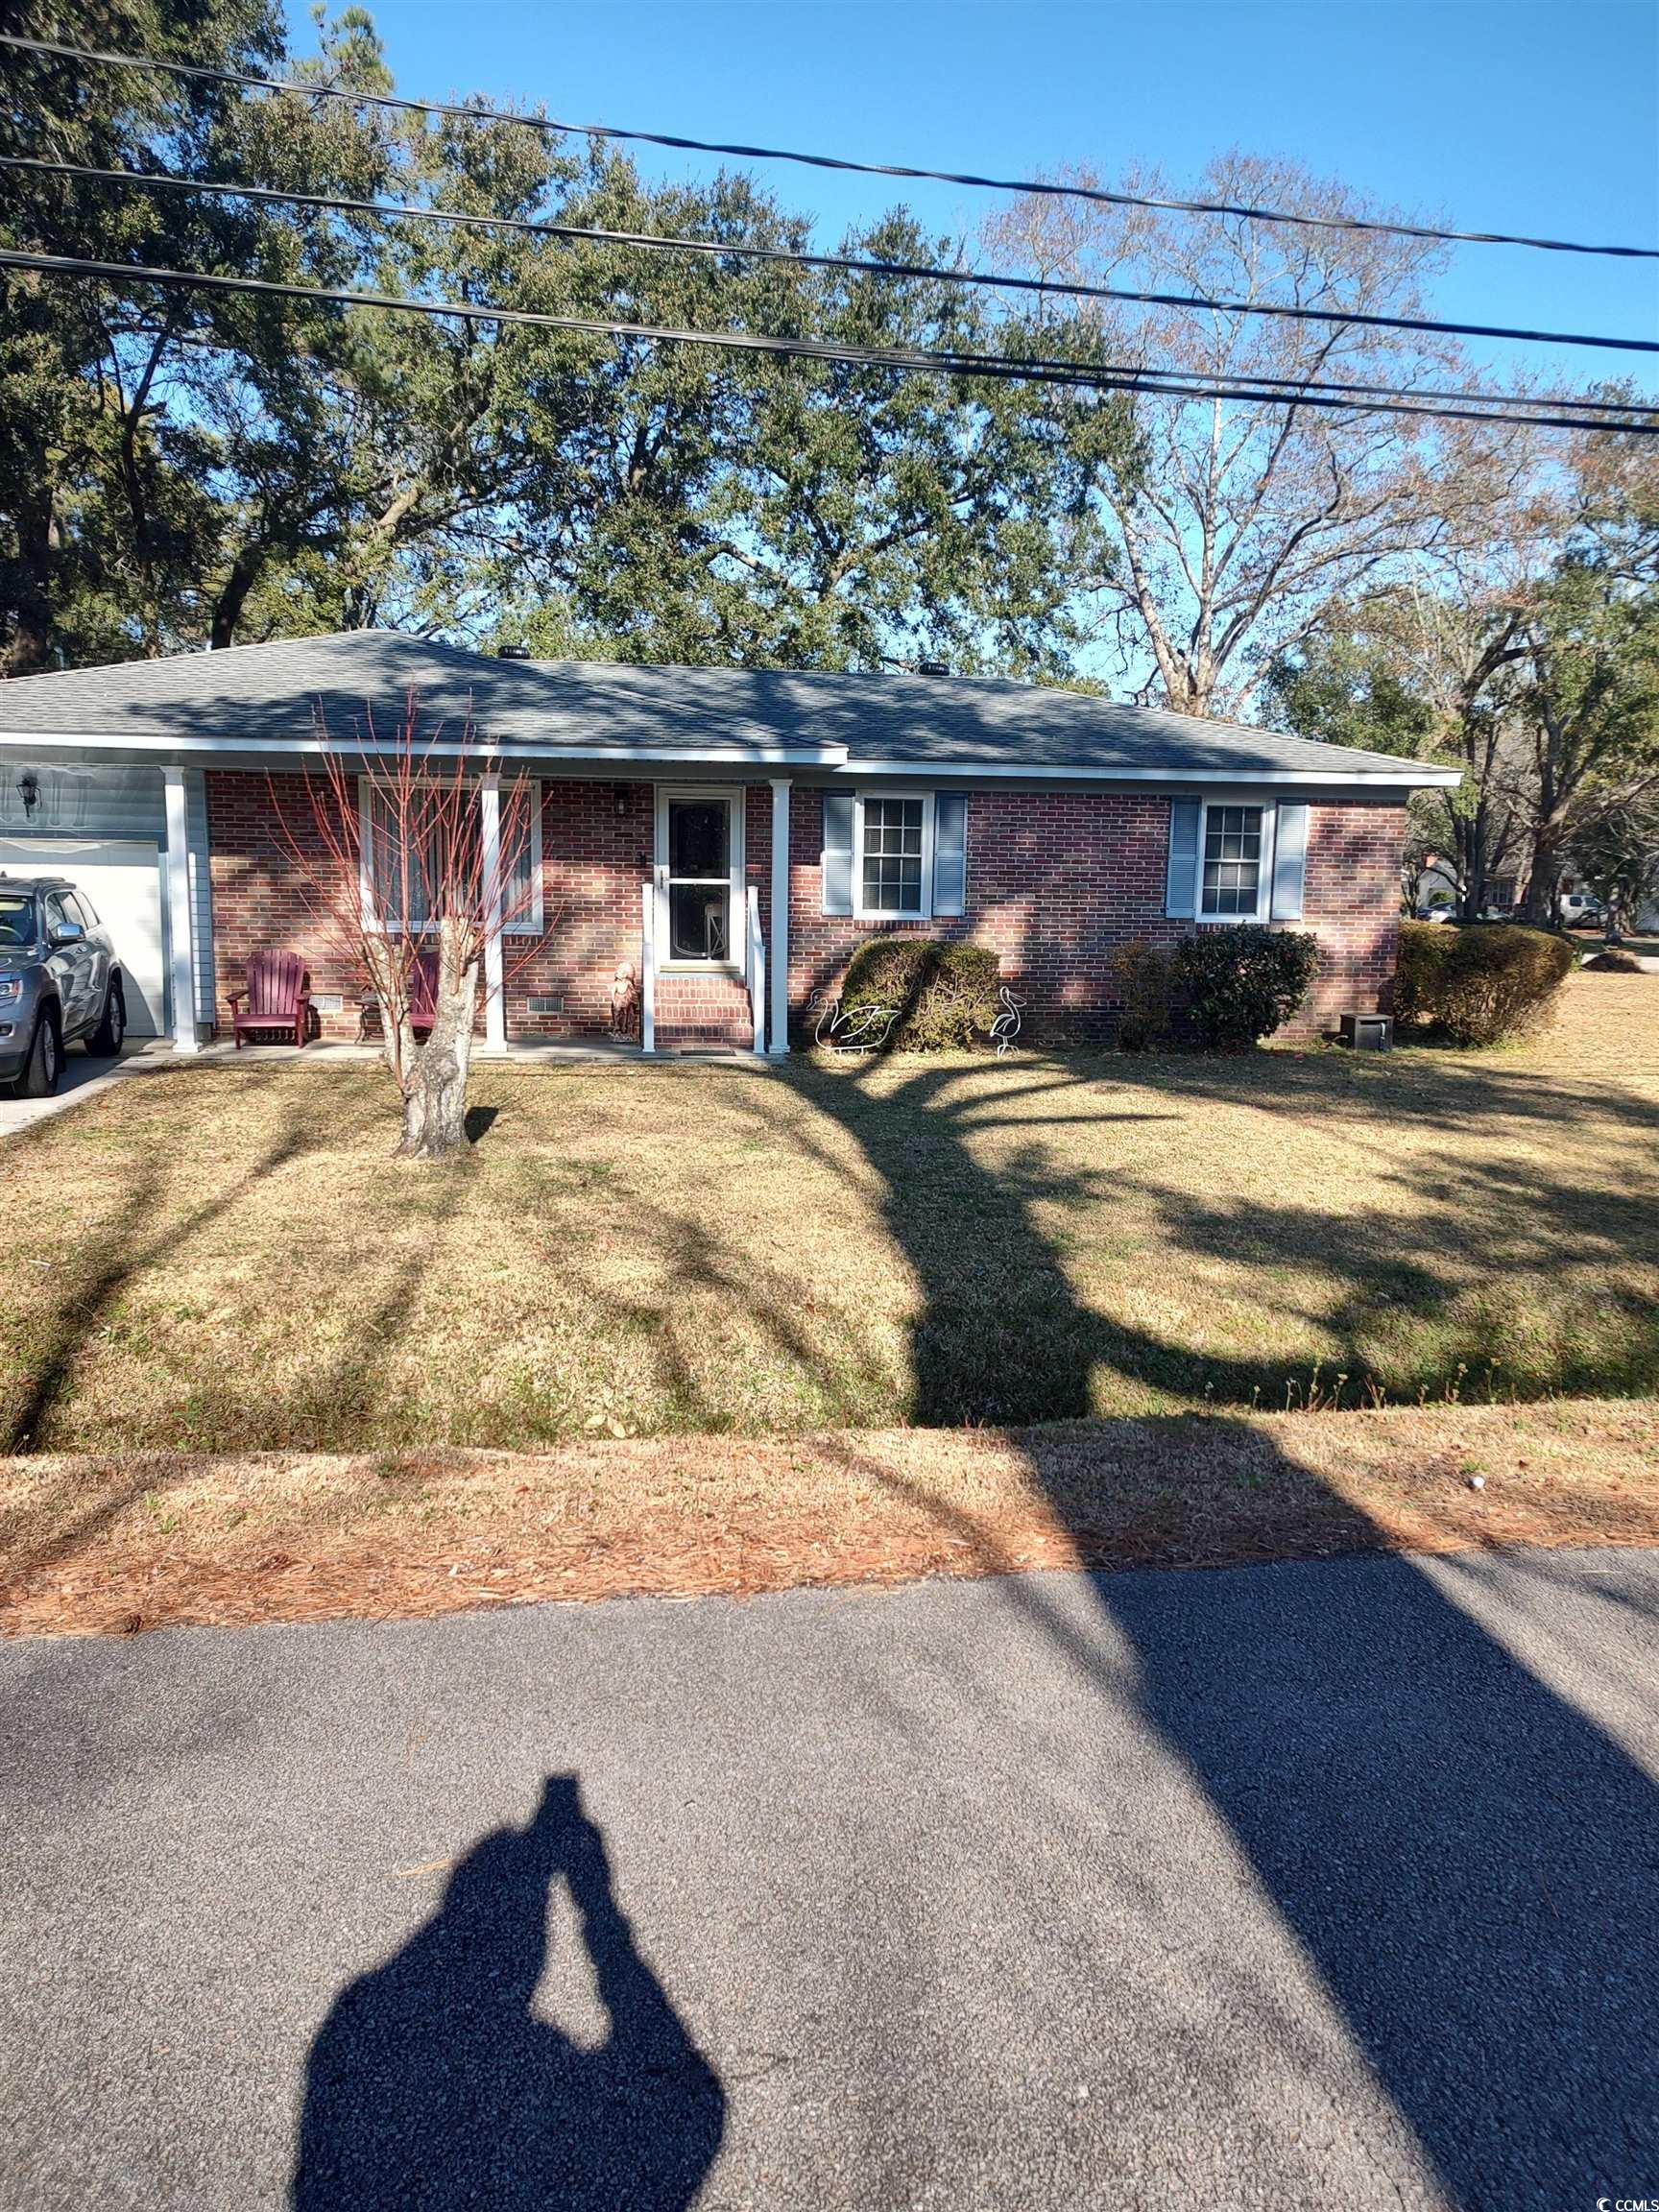 this home is a gem! very well maintained! beautiful hard wood floors! make your appointment today as this property will not last long. very close to all georgetown has to offer. beautiful front street is just a stones throw away.